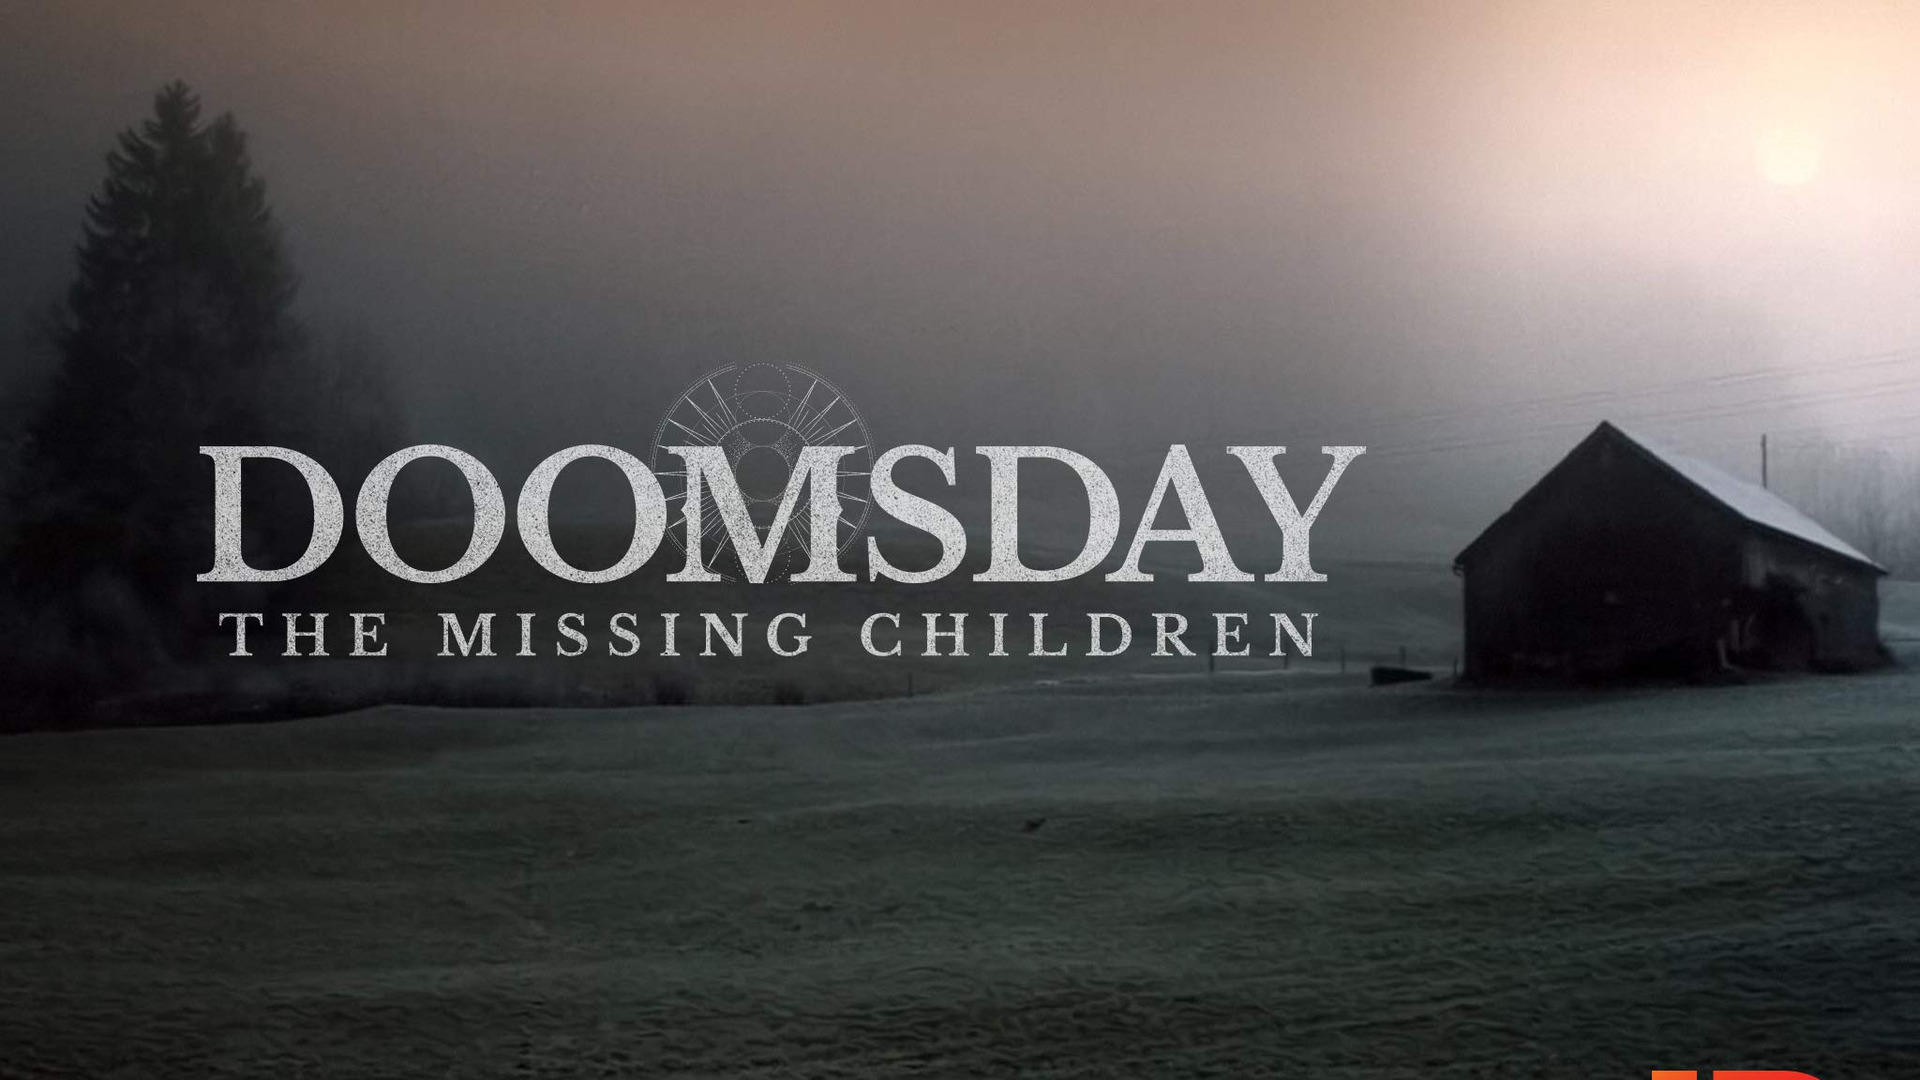 Show Doomsday: The Missing Children